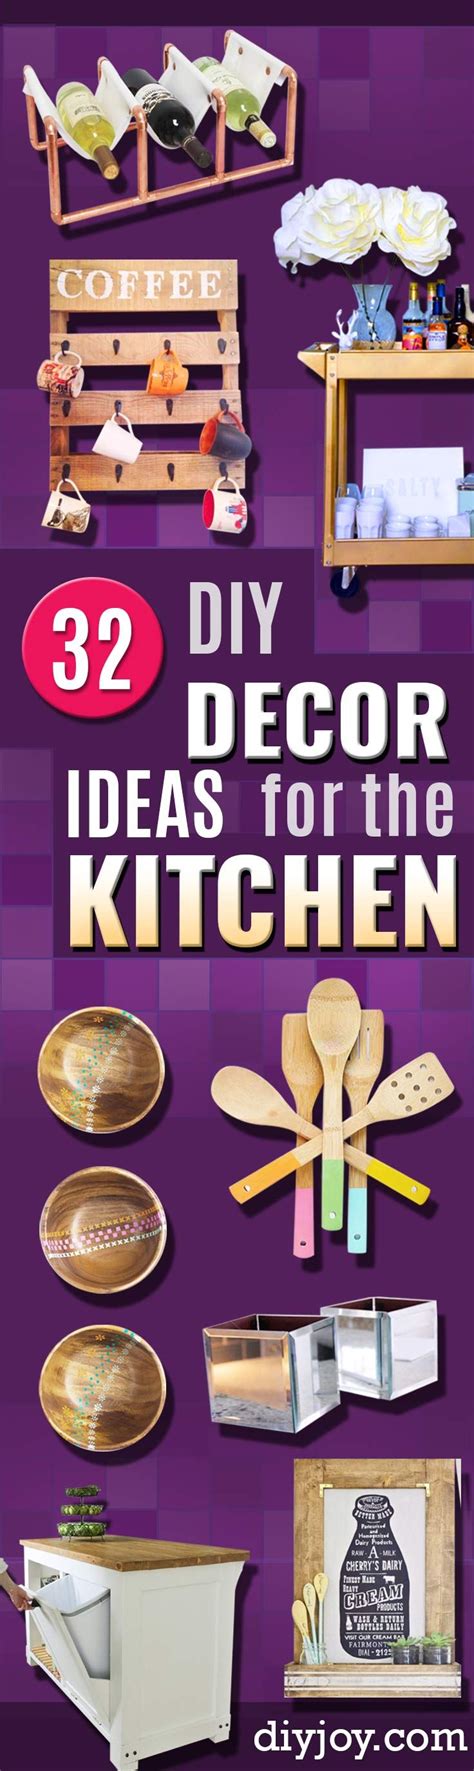 Diy Kitchen Decor Ideas 32 Easy Projects To Make For Your Home Diy